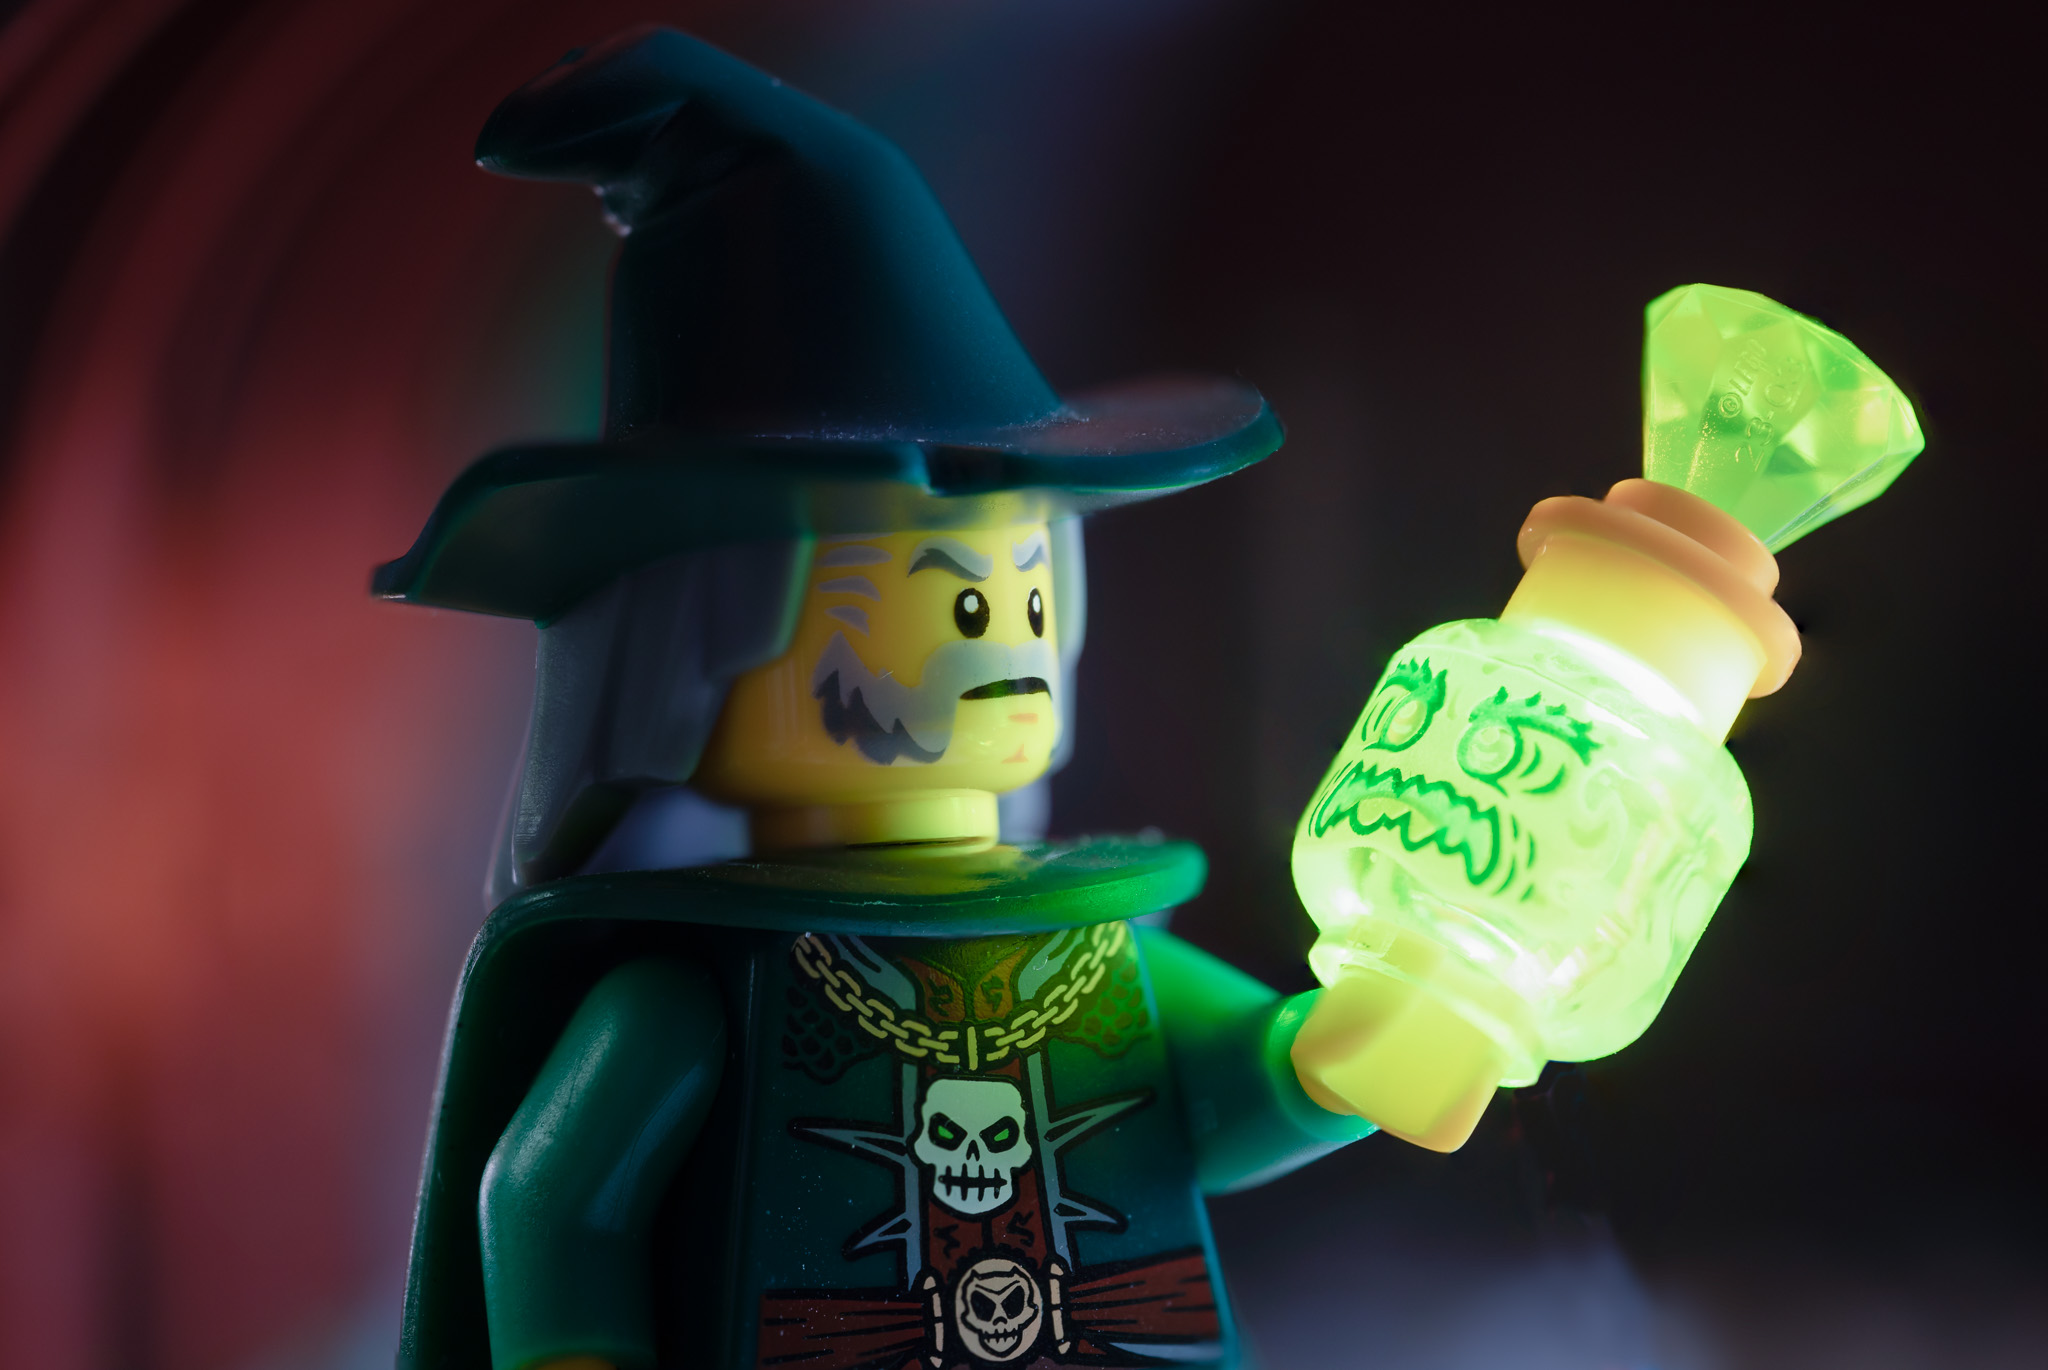 A Lego figure in medieval dress, holding a glowing Lego head.